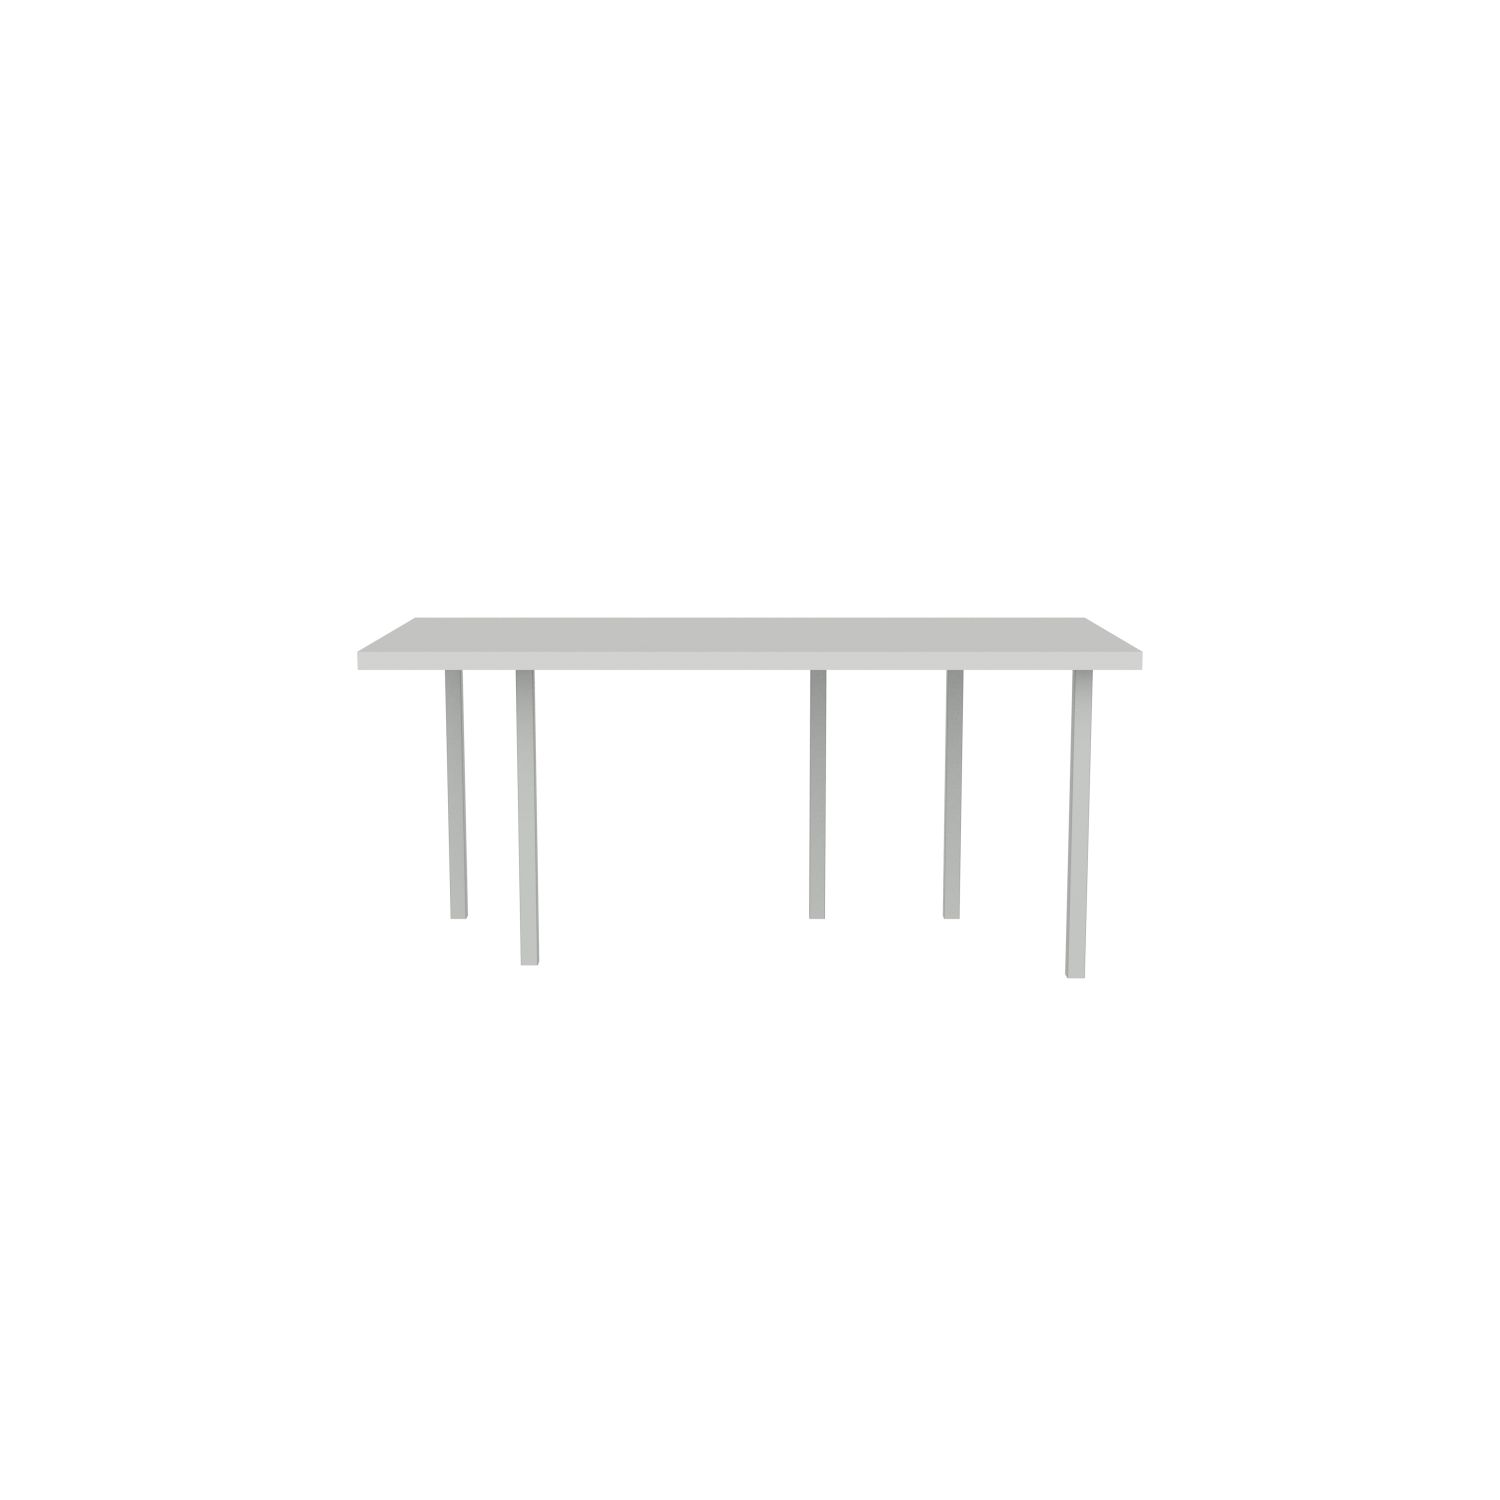 lensvelt bbrand table five fixed heigt 80x172 hpl white 50 mm price level 1 light grey ral7035